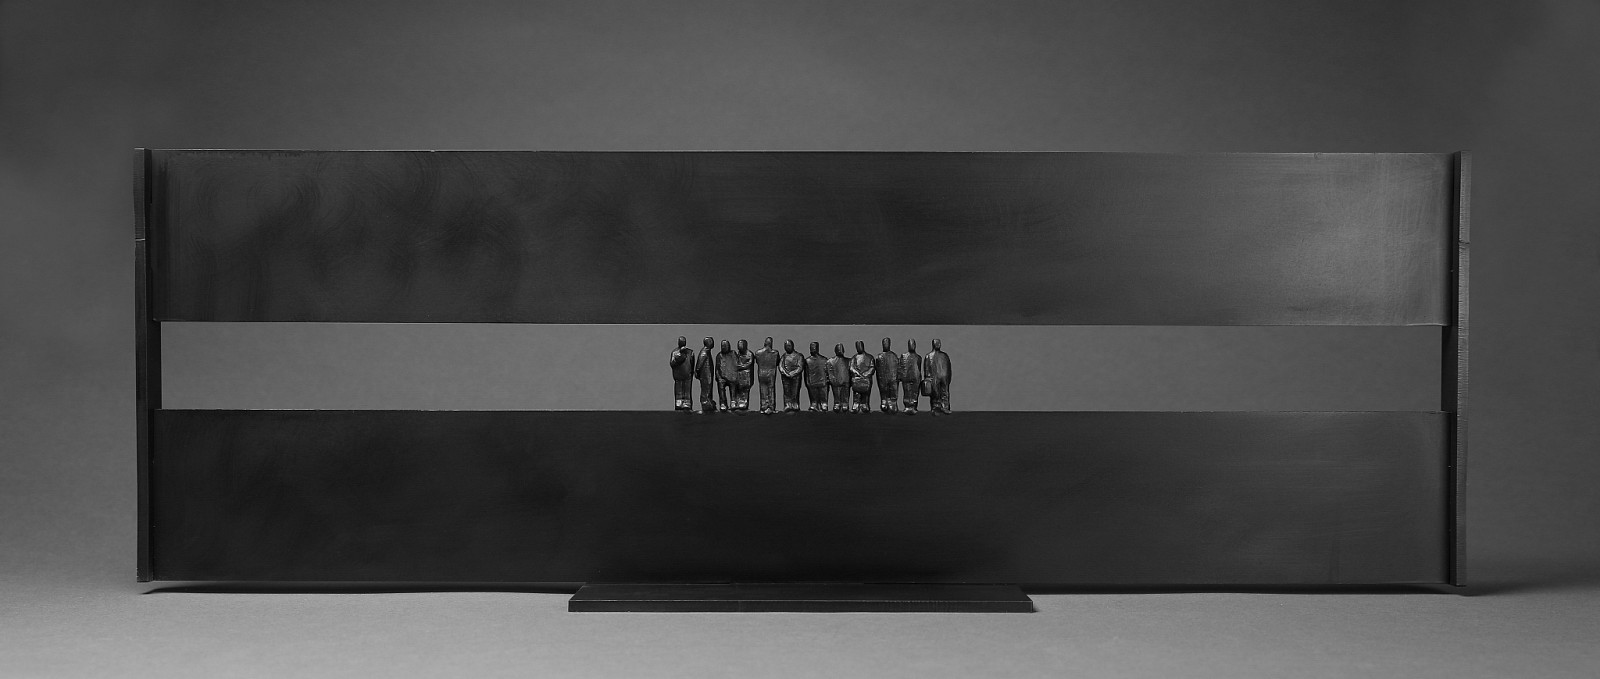 Jim Rennert, In Transit III, Edition of 9, 2018
bronze and steel, 10 x 30 x 6 in. (25.4 x 76.2 x 15.2 cm)